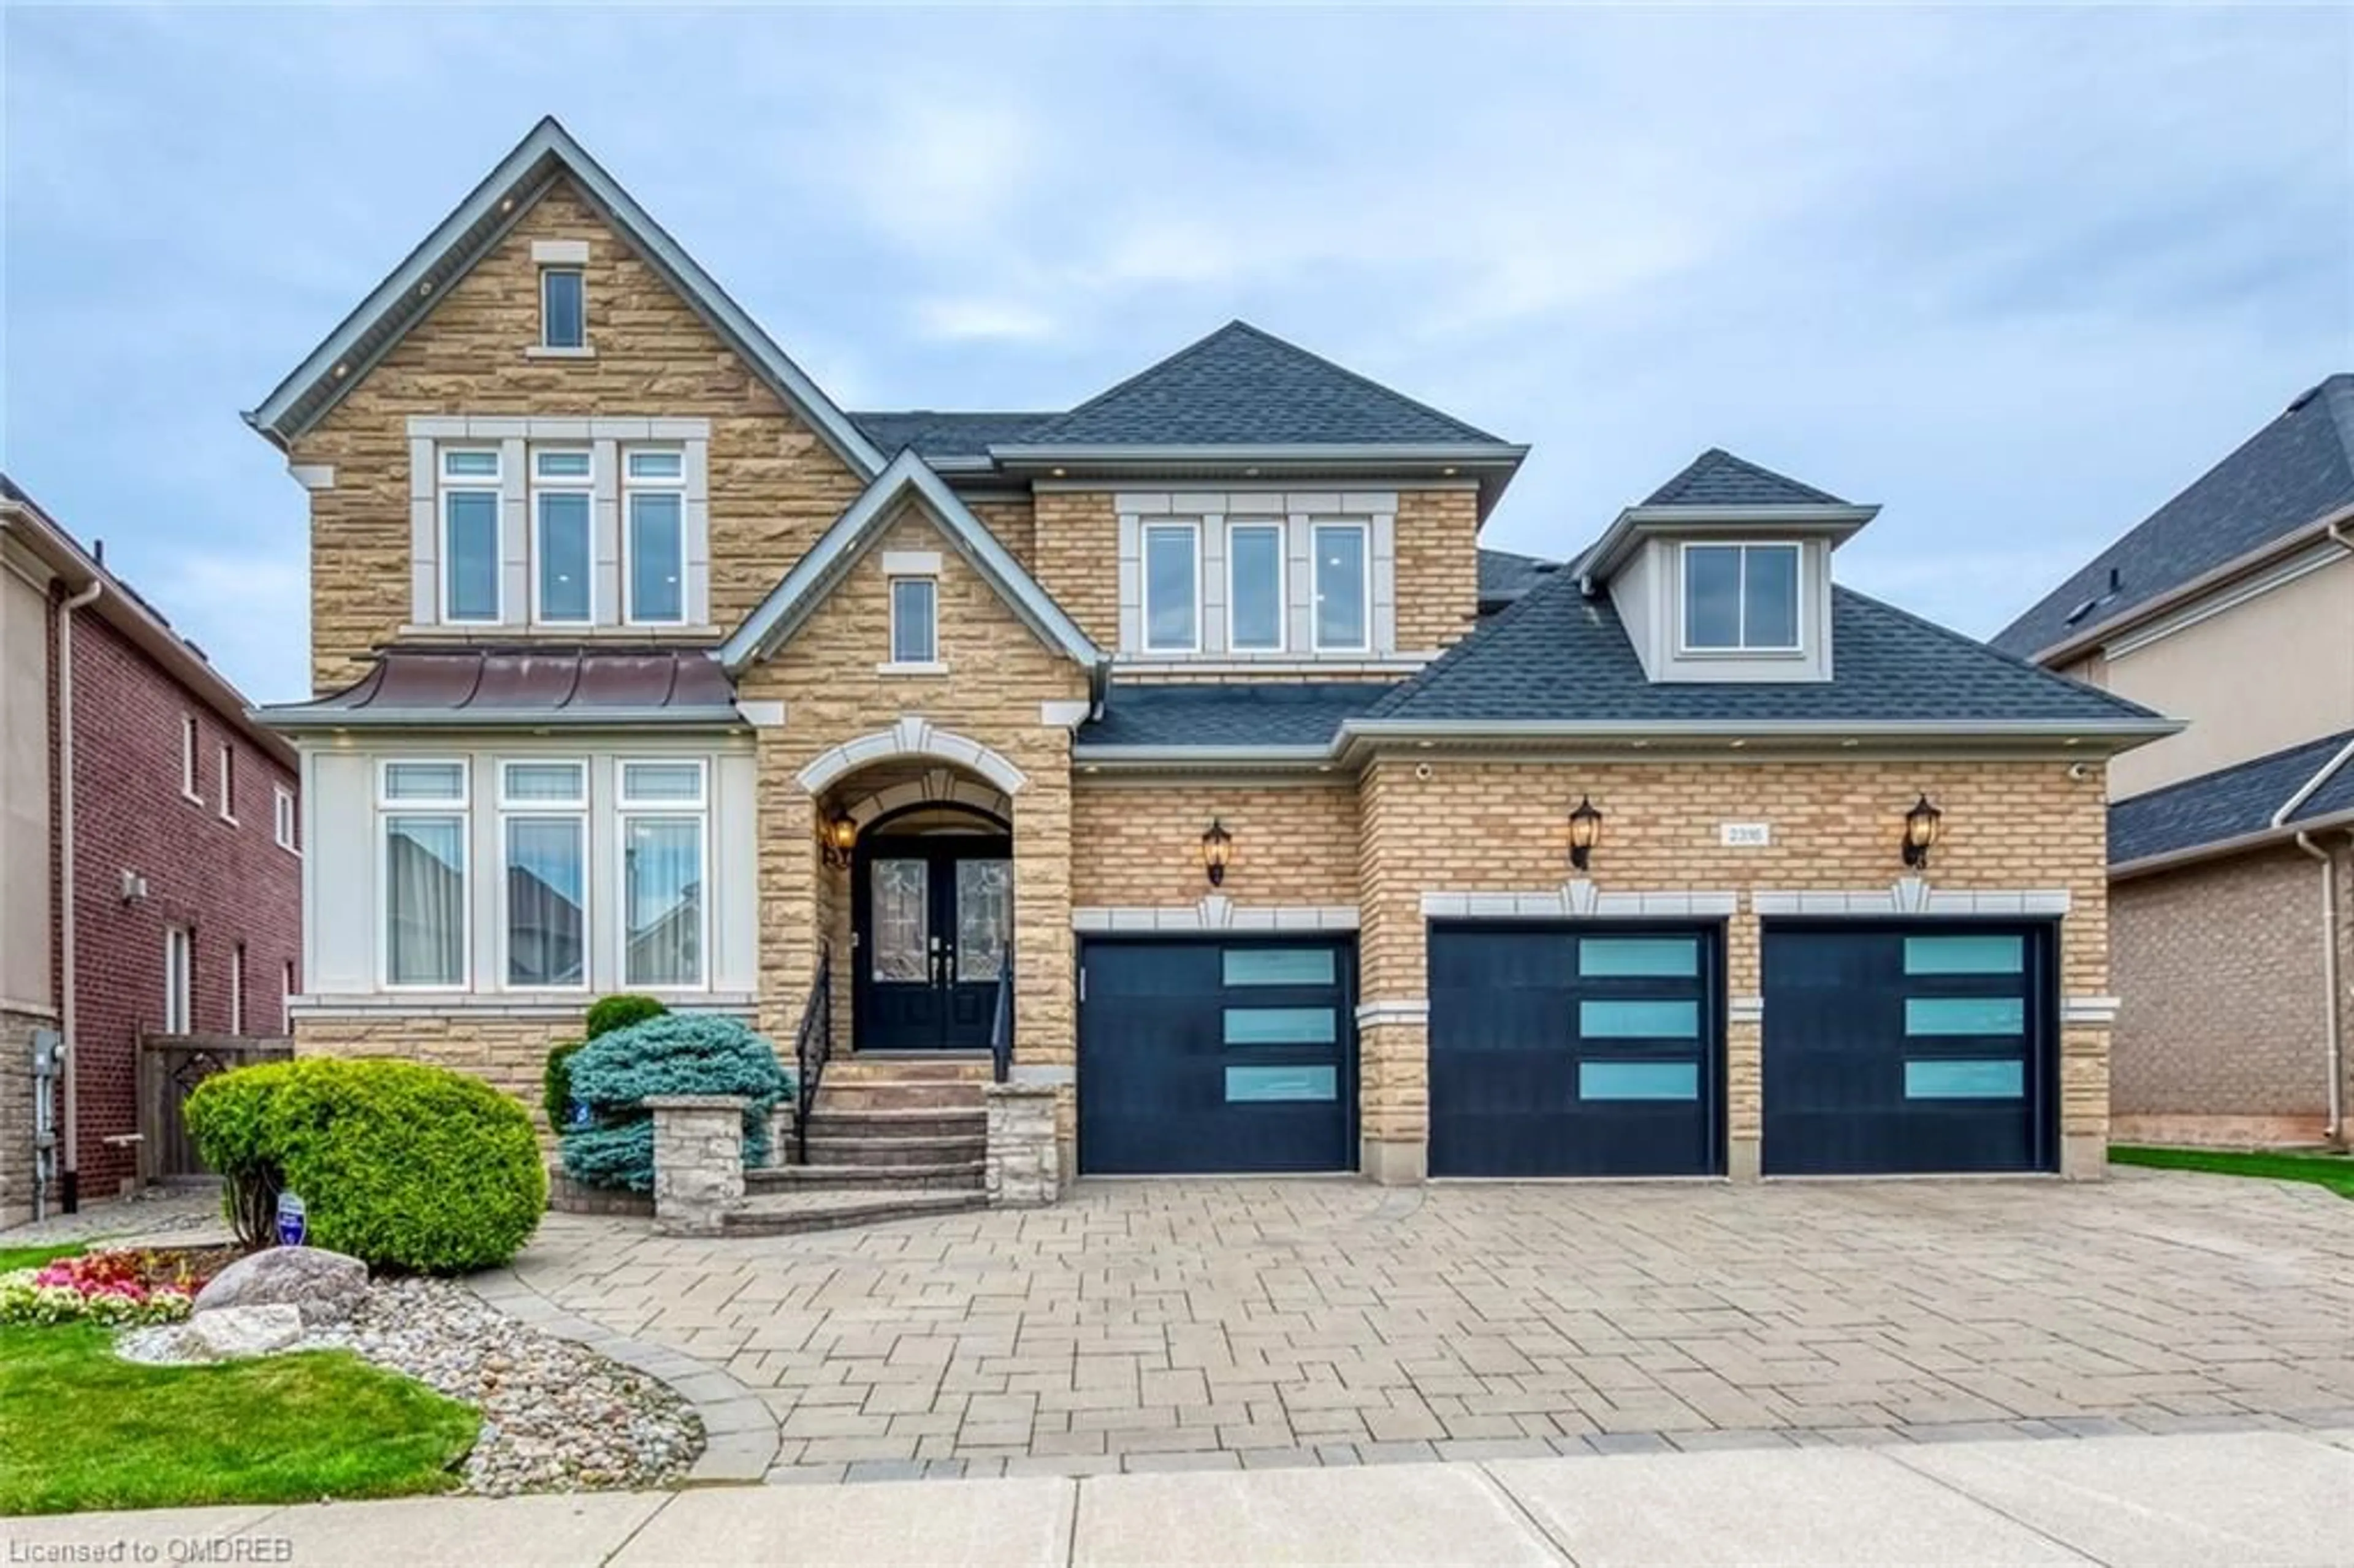 Home with brick exterior material for 2316 Delnice Dr, Oakville Ontario L6H 0A9